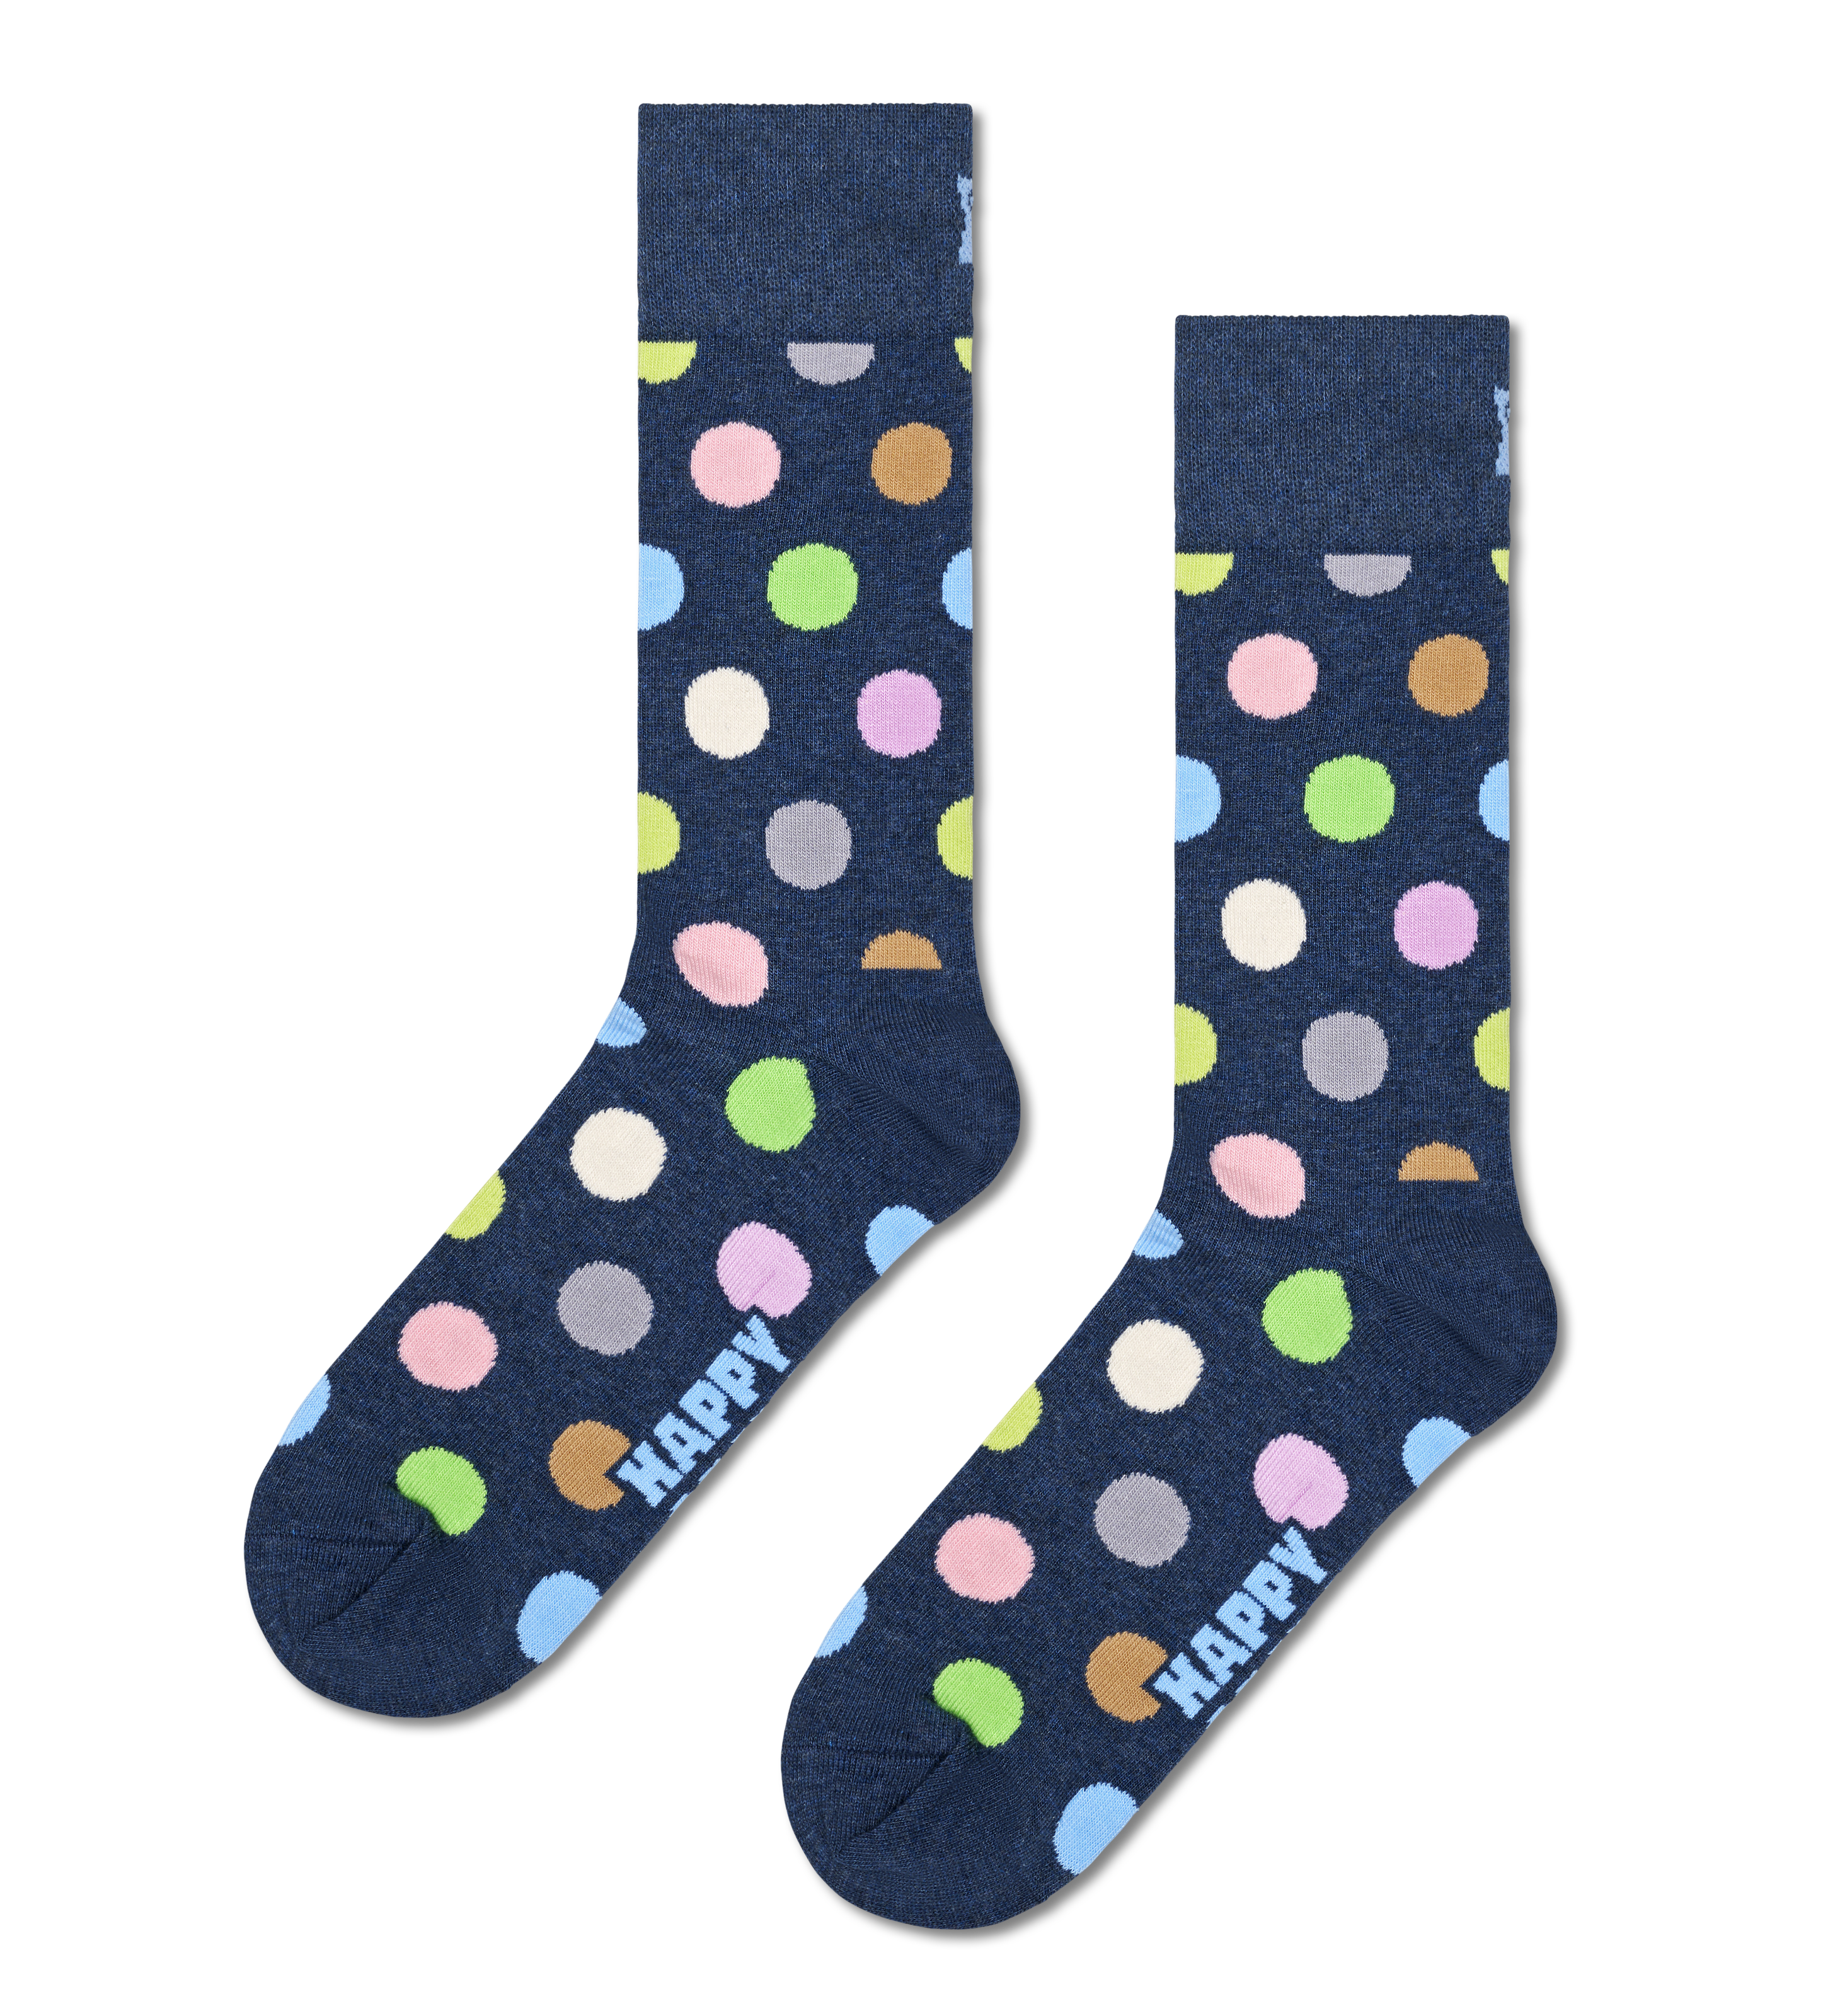 Happy Socks & Brink Commerce: Colorful global happiness